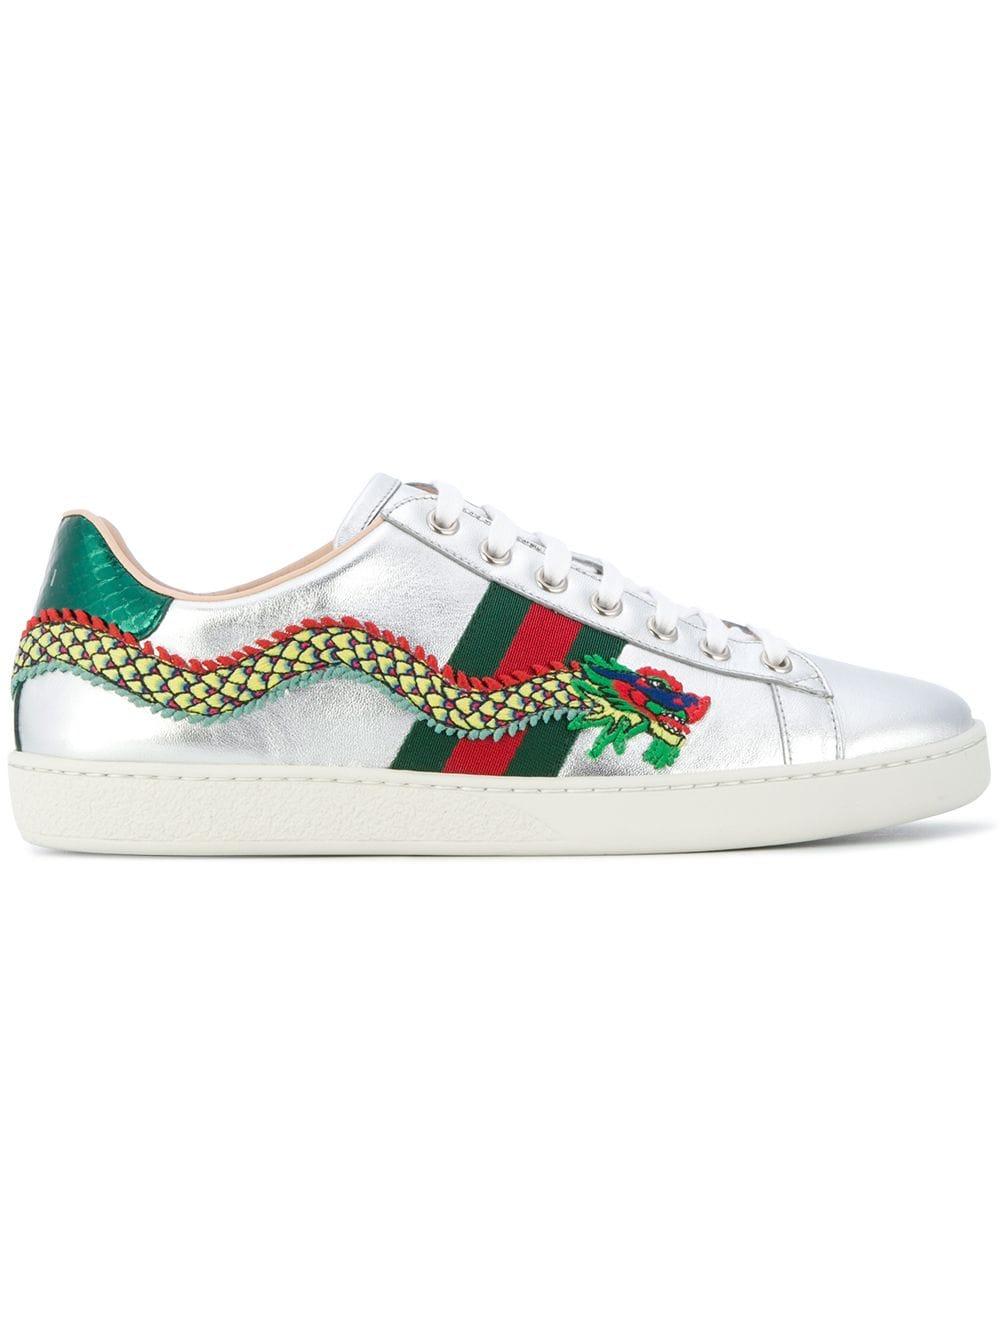 af at ringe Ubetydelig Gucci Ace Dragon Embroidered Sneakers in Metallic | Lyst